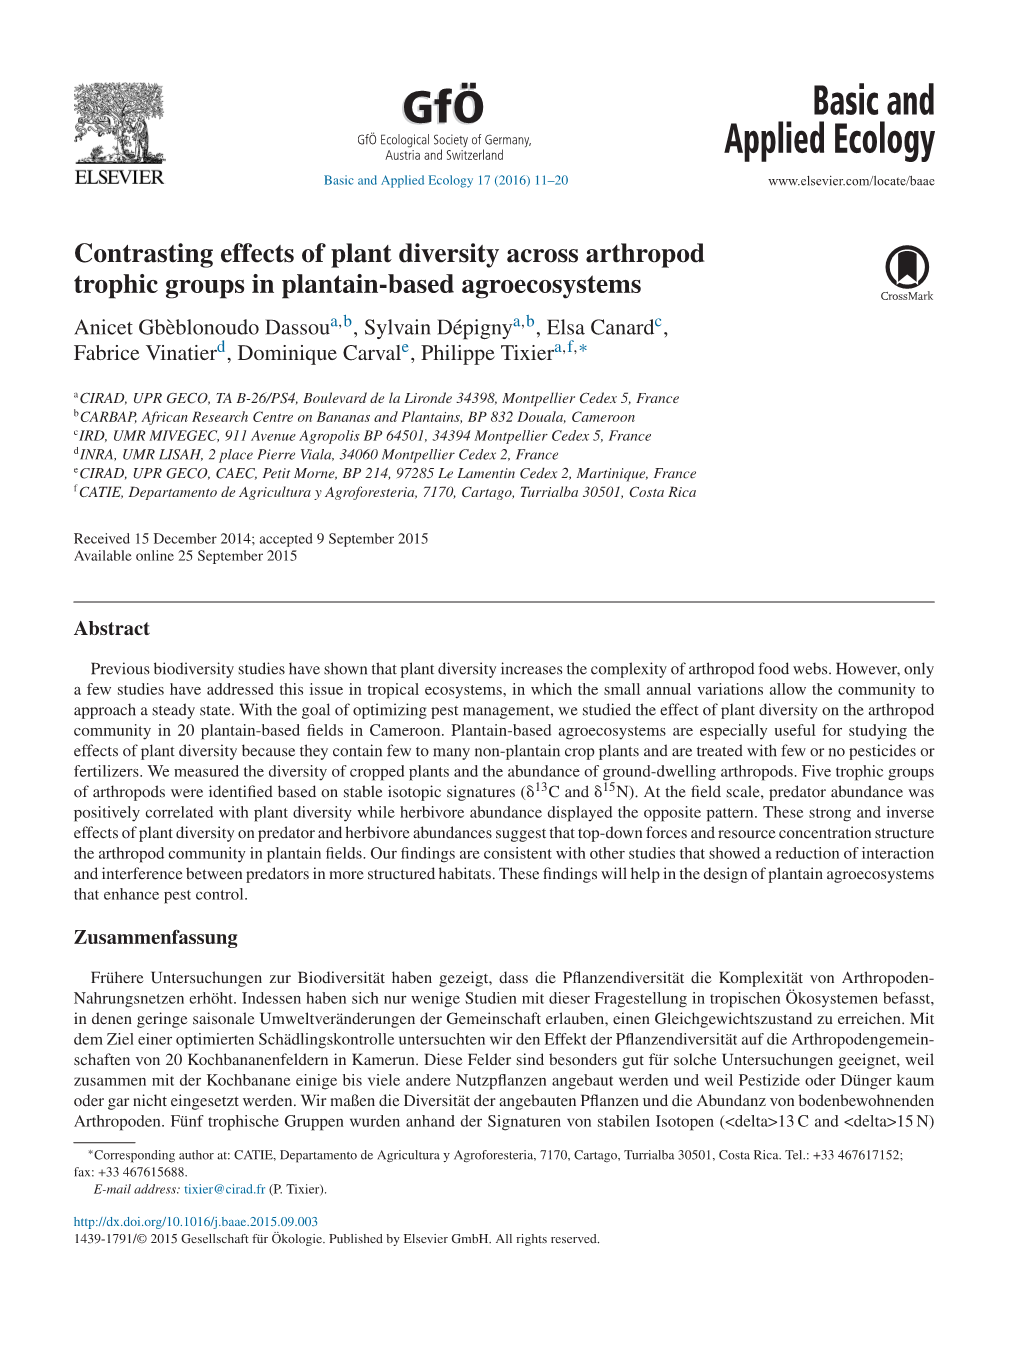 Contrasting Effects of Plant Diversity Across Arthropod Trophic Groups In